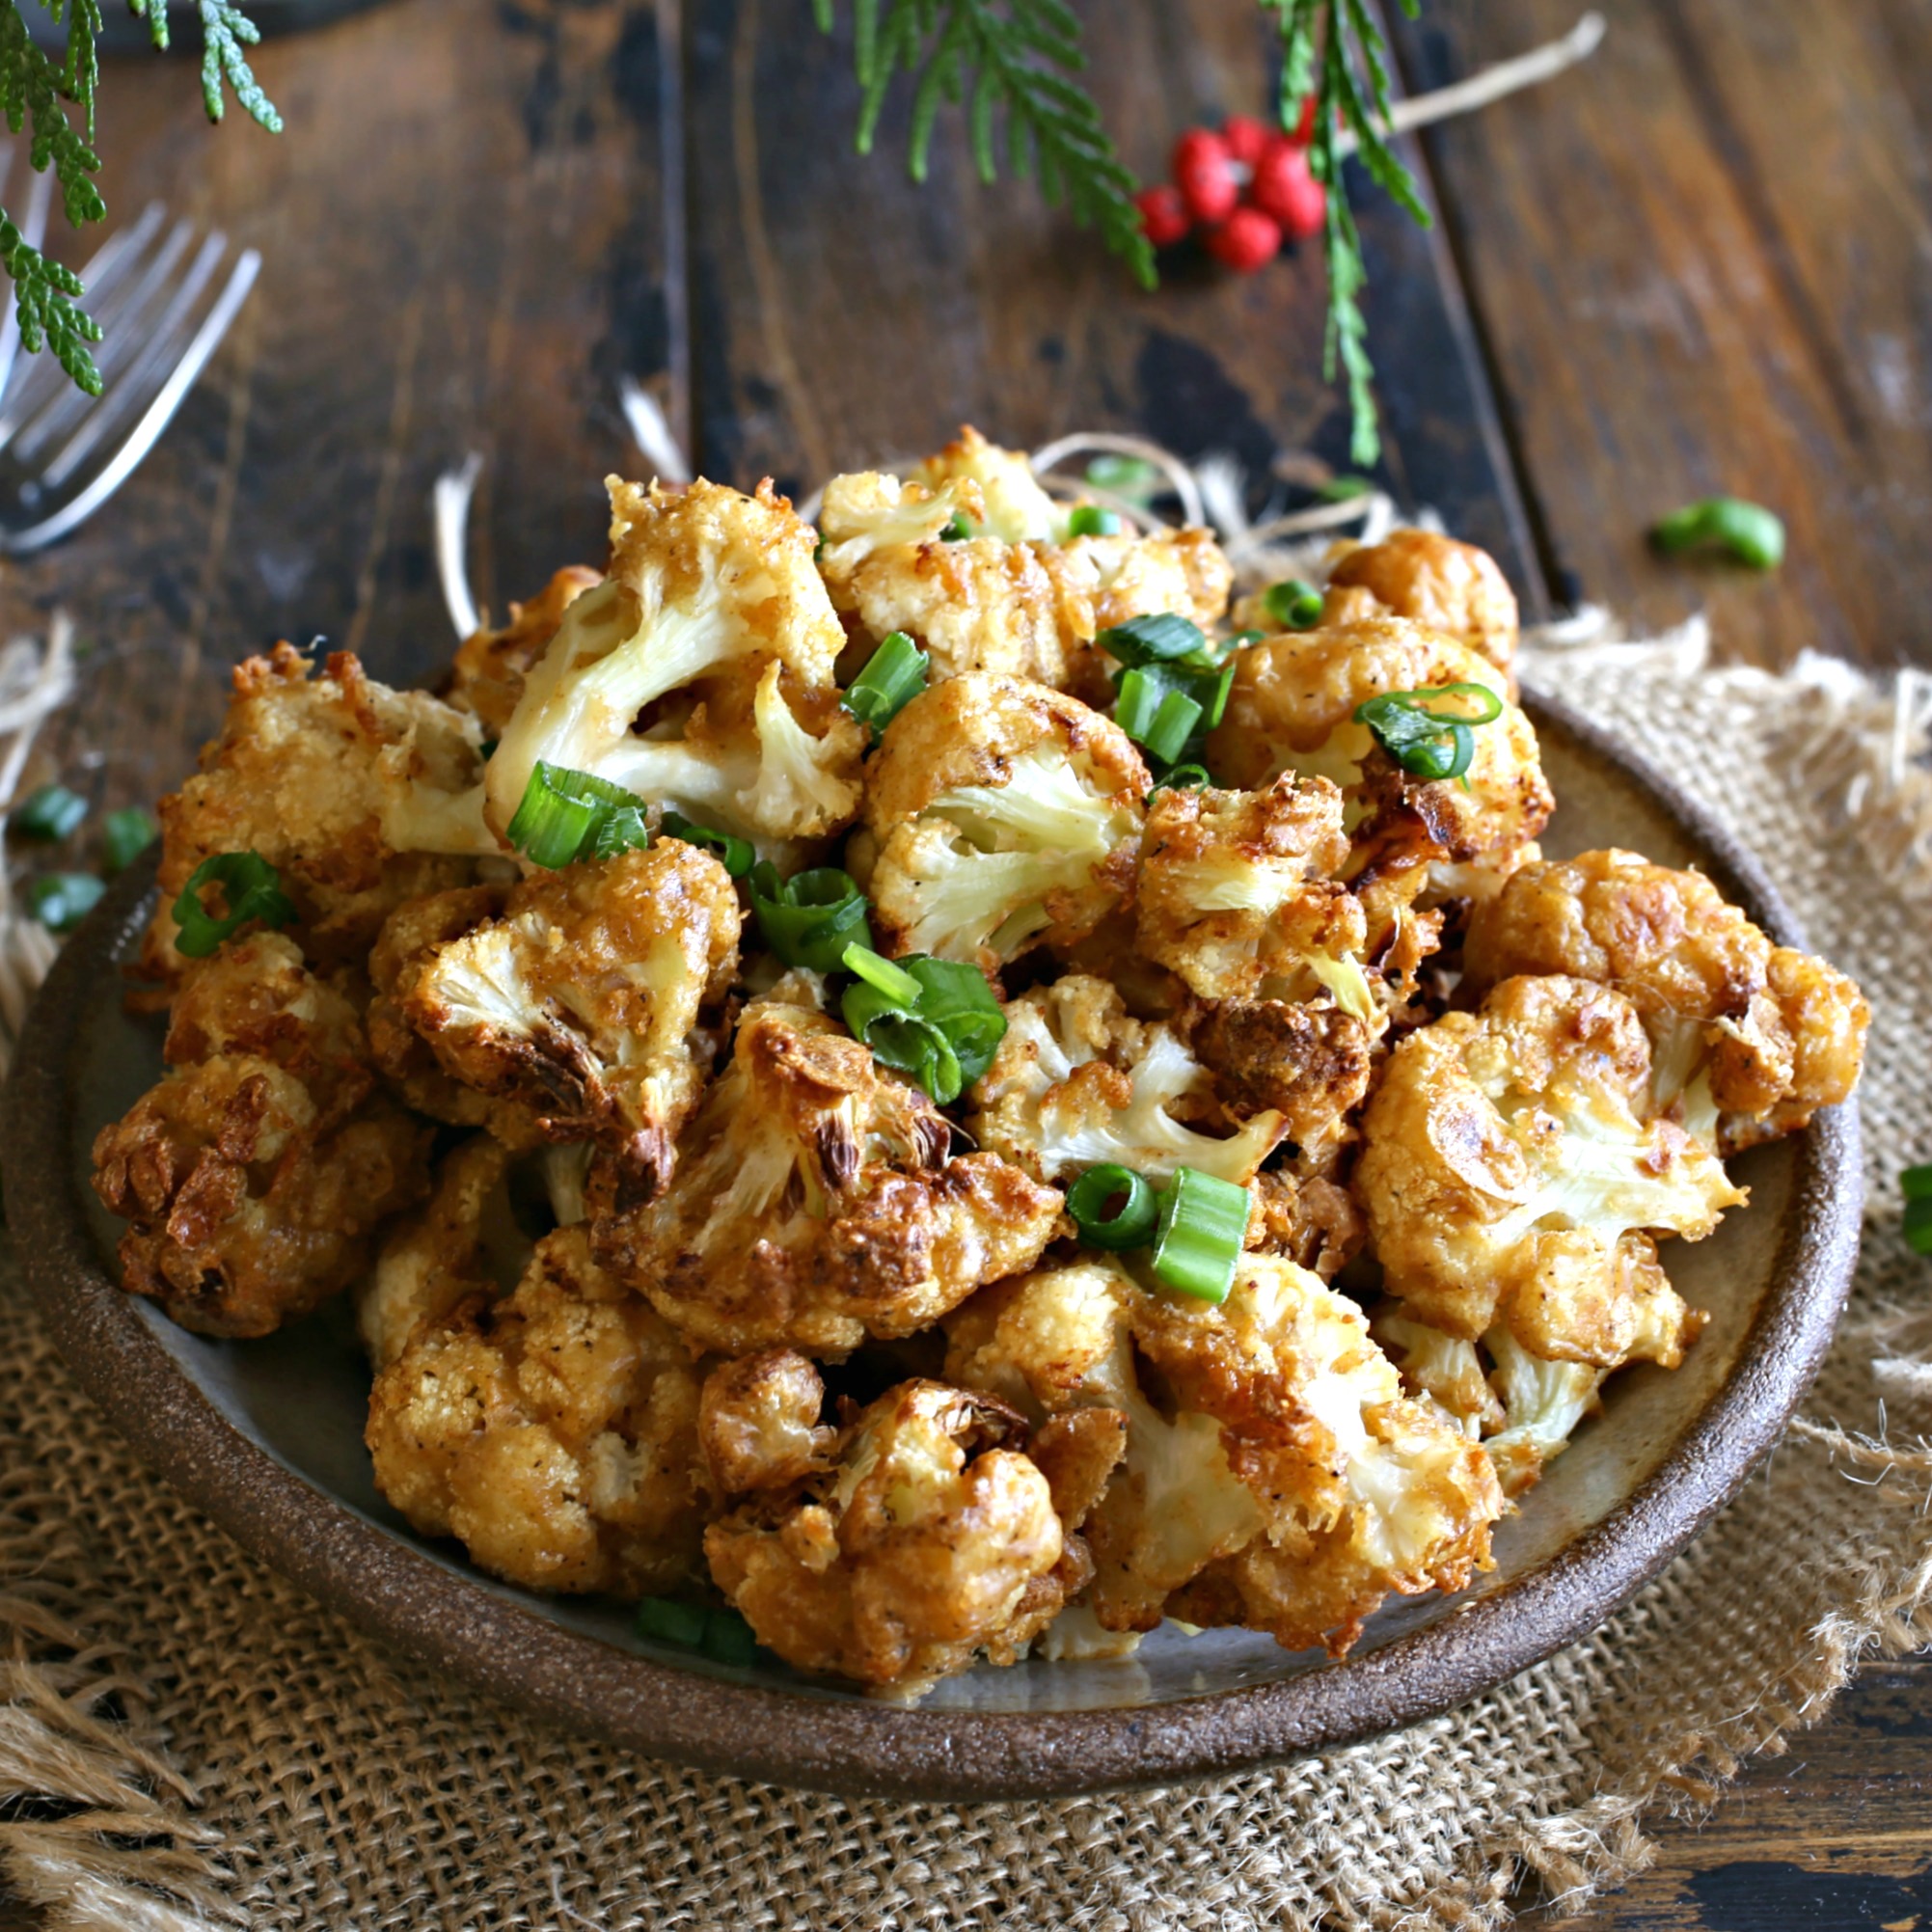 Recipe for cauliflower coated in a seasoned beer batter and cooked in an air fryer.